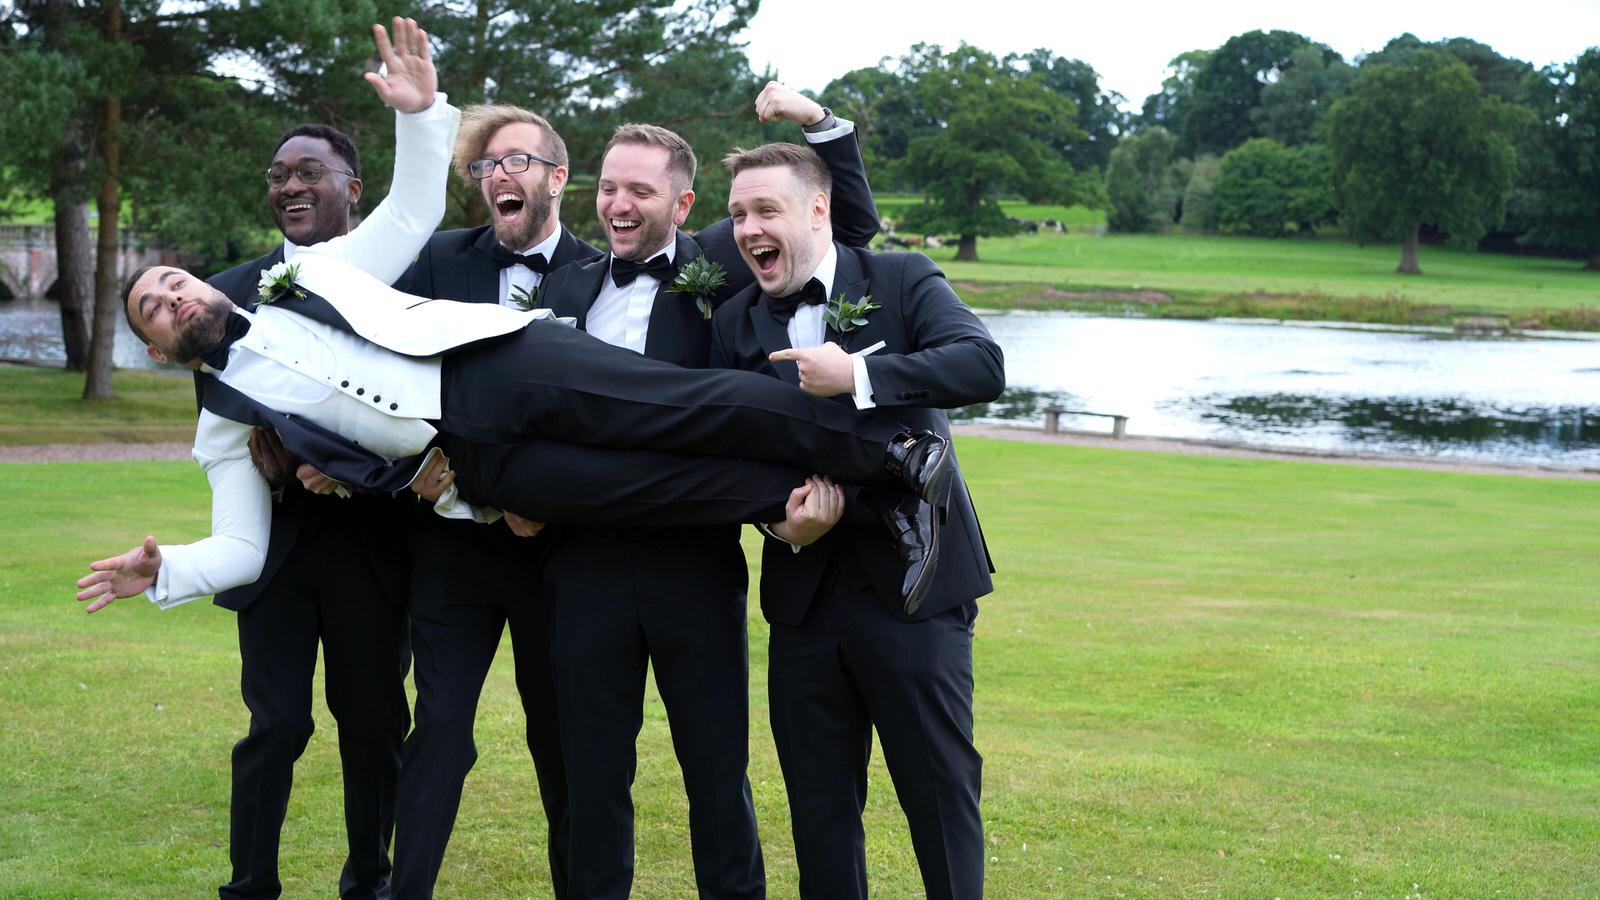 the groomsman lift the groom for a photo